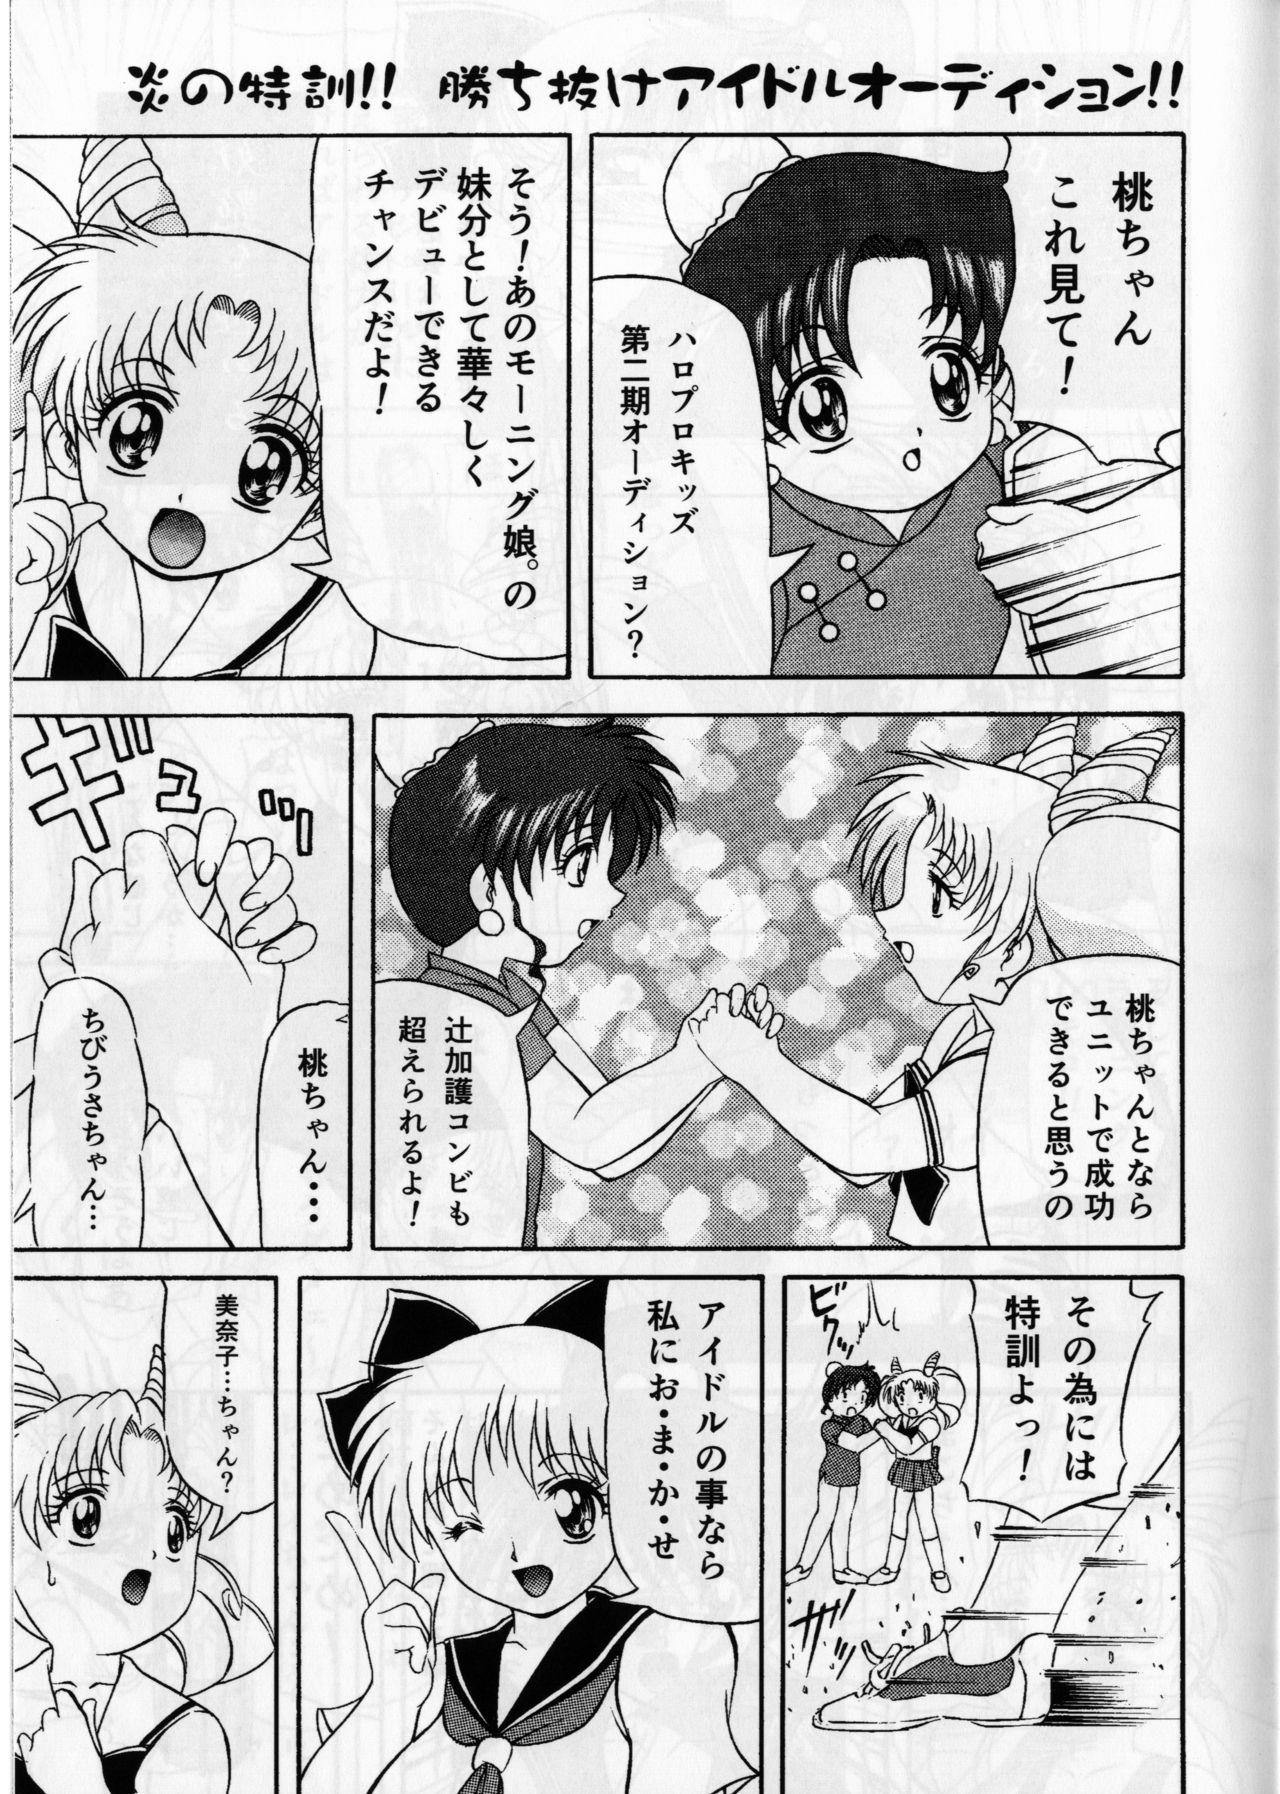 Celebrity Porn Pink Sugar 20th Anniversary Special - Sailor moon Pack - Page 7